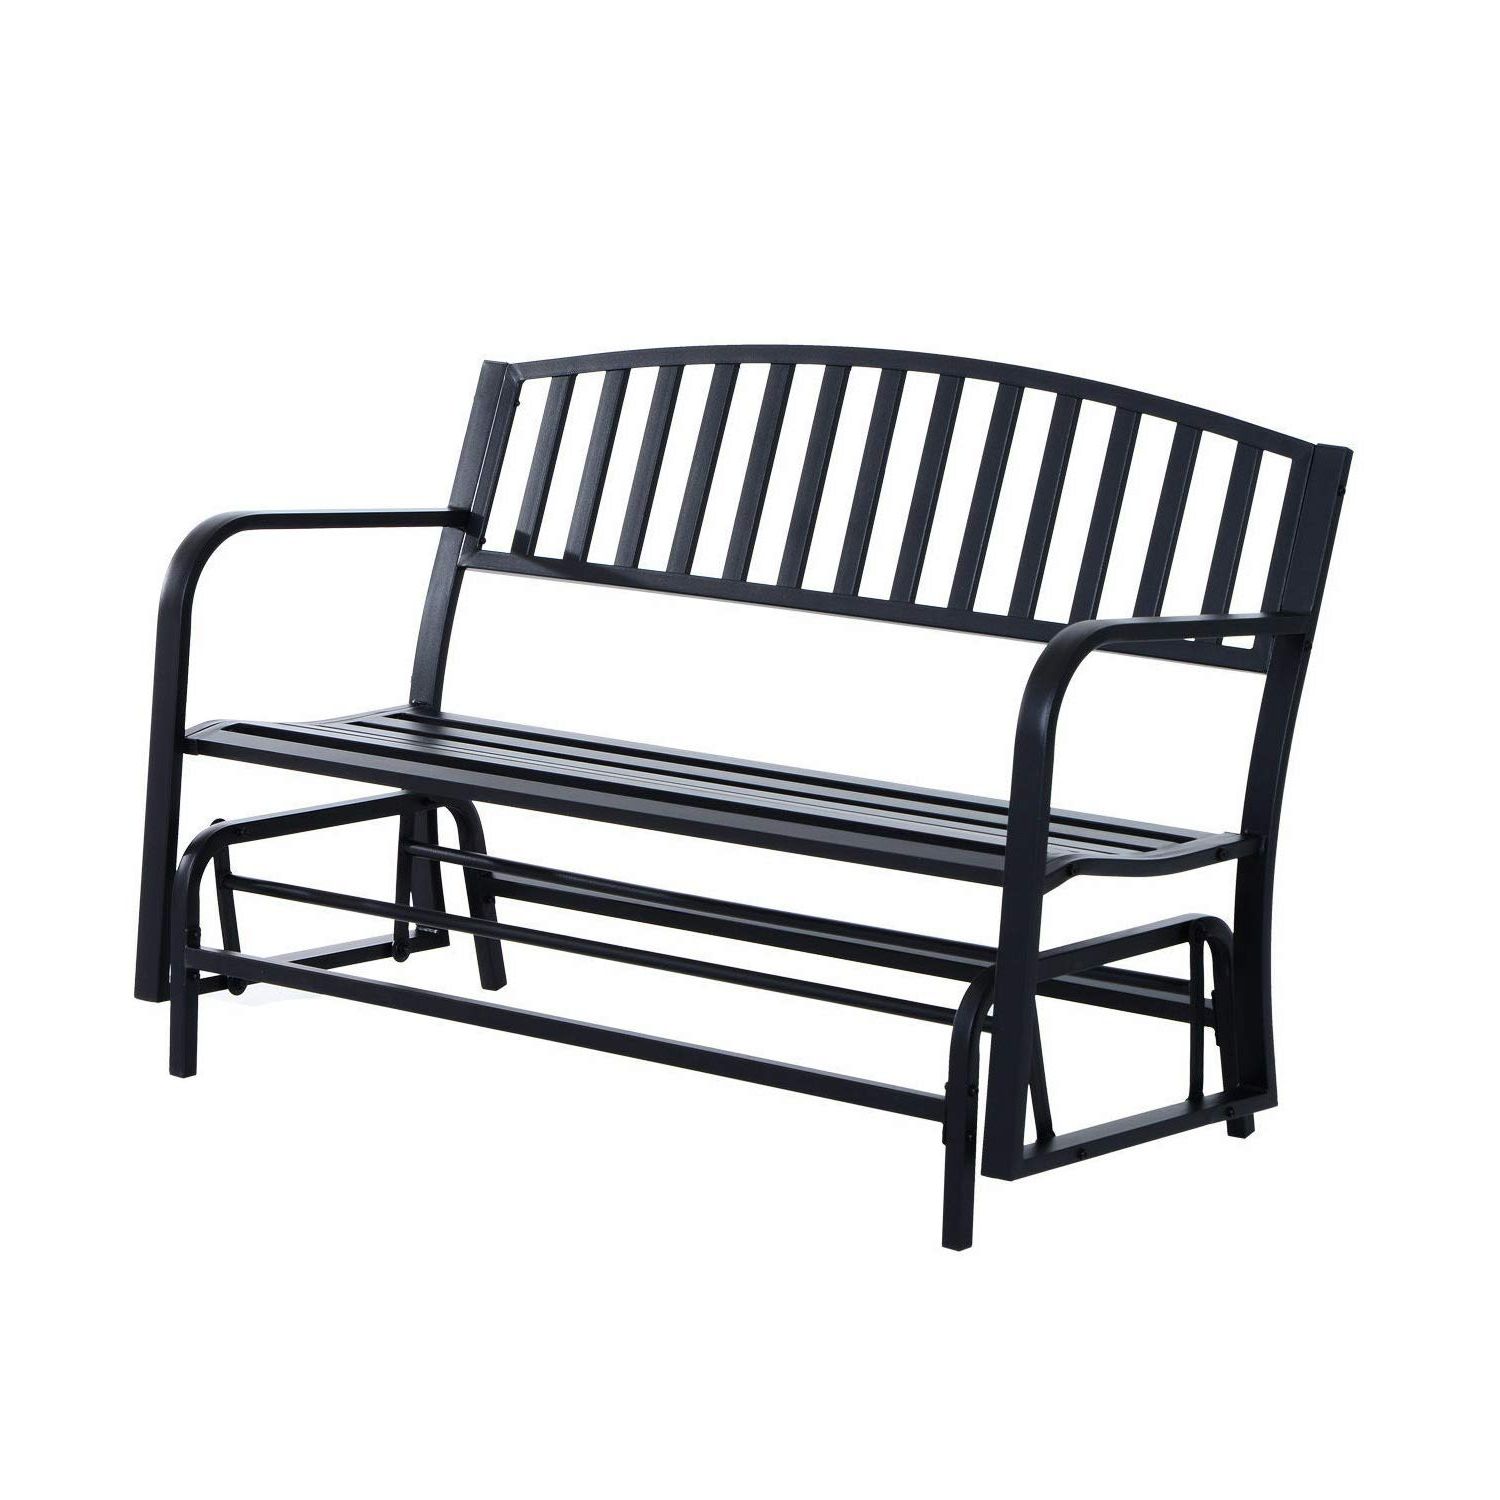 Outdoor Patio Swing Porch Rocker Glider Benches Loveseat Garden Seat Steel Pertaining To Latest Amazon : Black Patio Swing Glider Bench For 2 Persons (View 11 of 30)